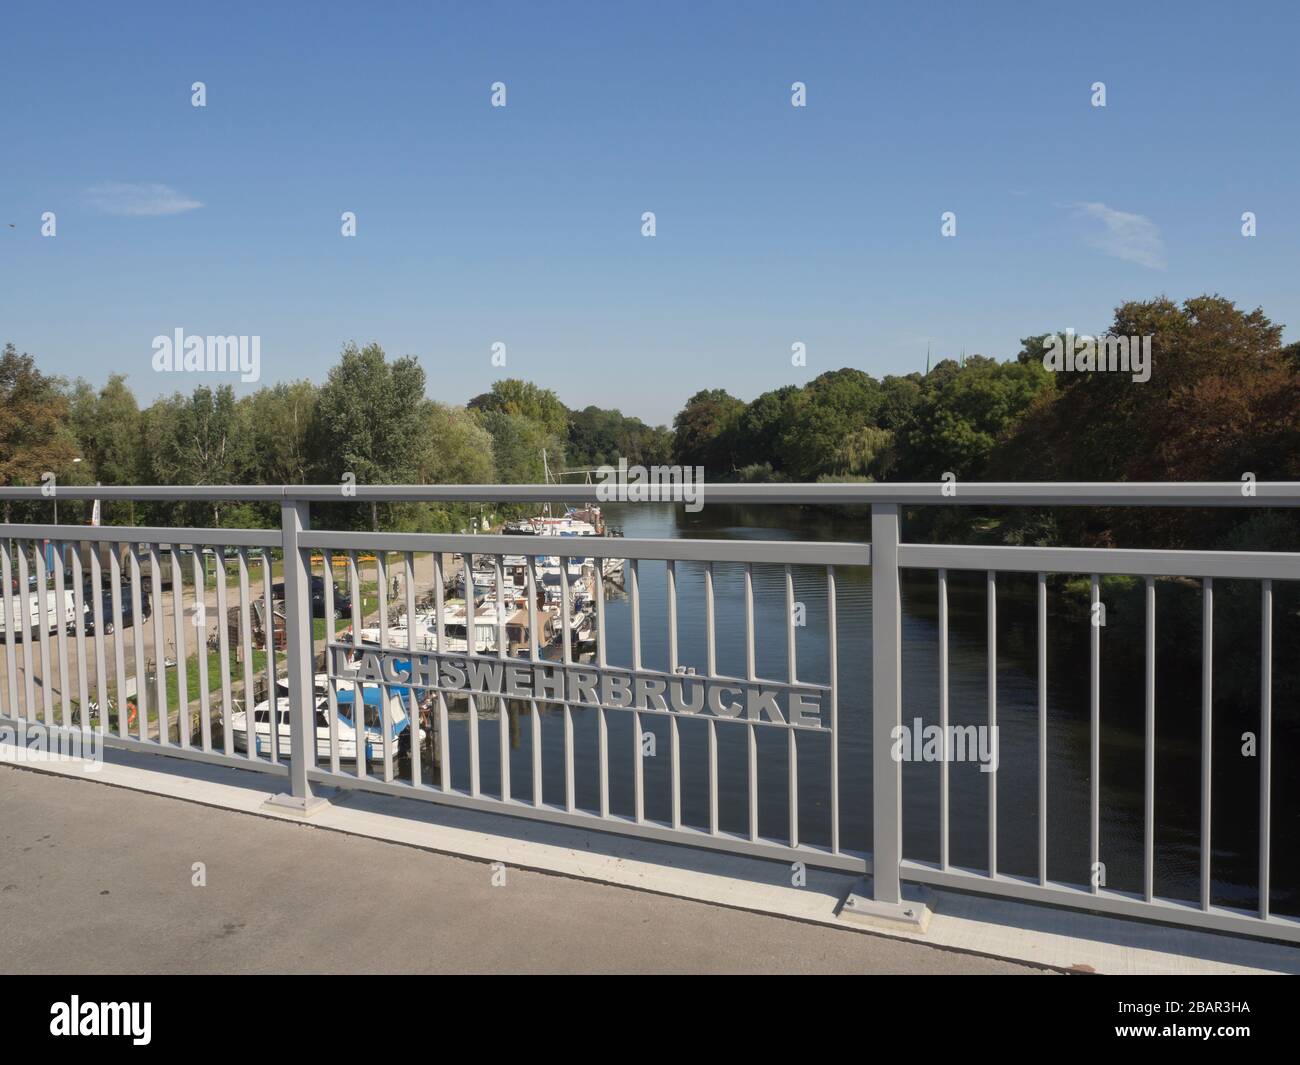 The Lachswerbrücke bridge in Lübeck Germany, crossing the river Trave, popular for leisure boating Stock Photo